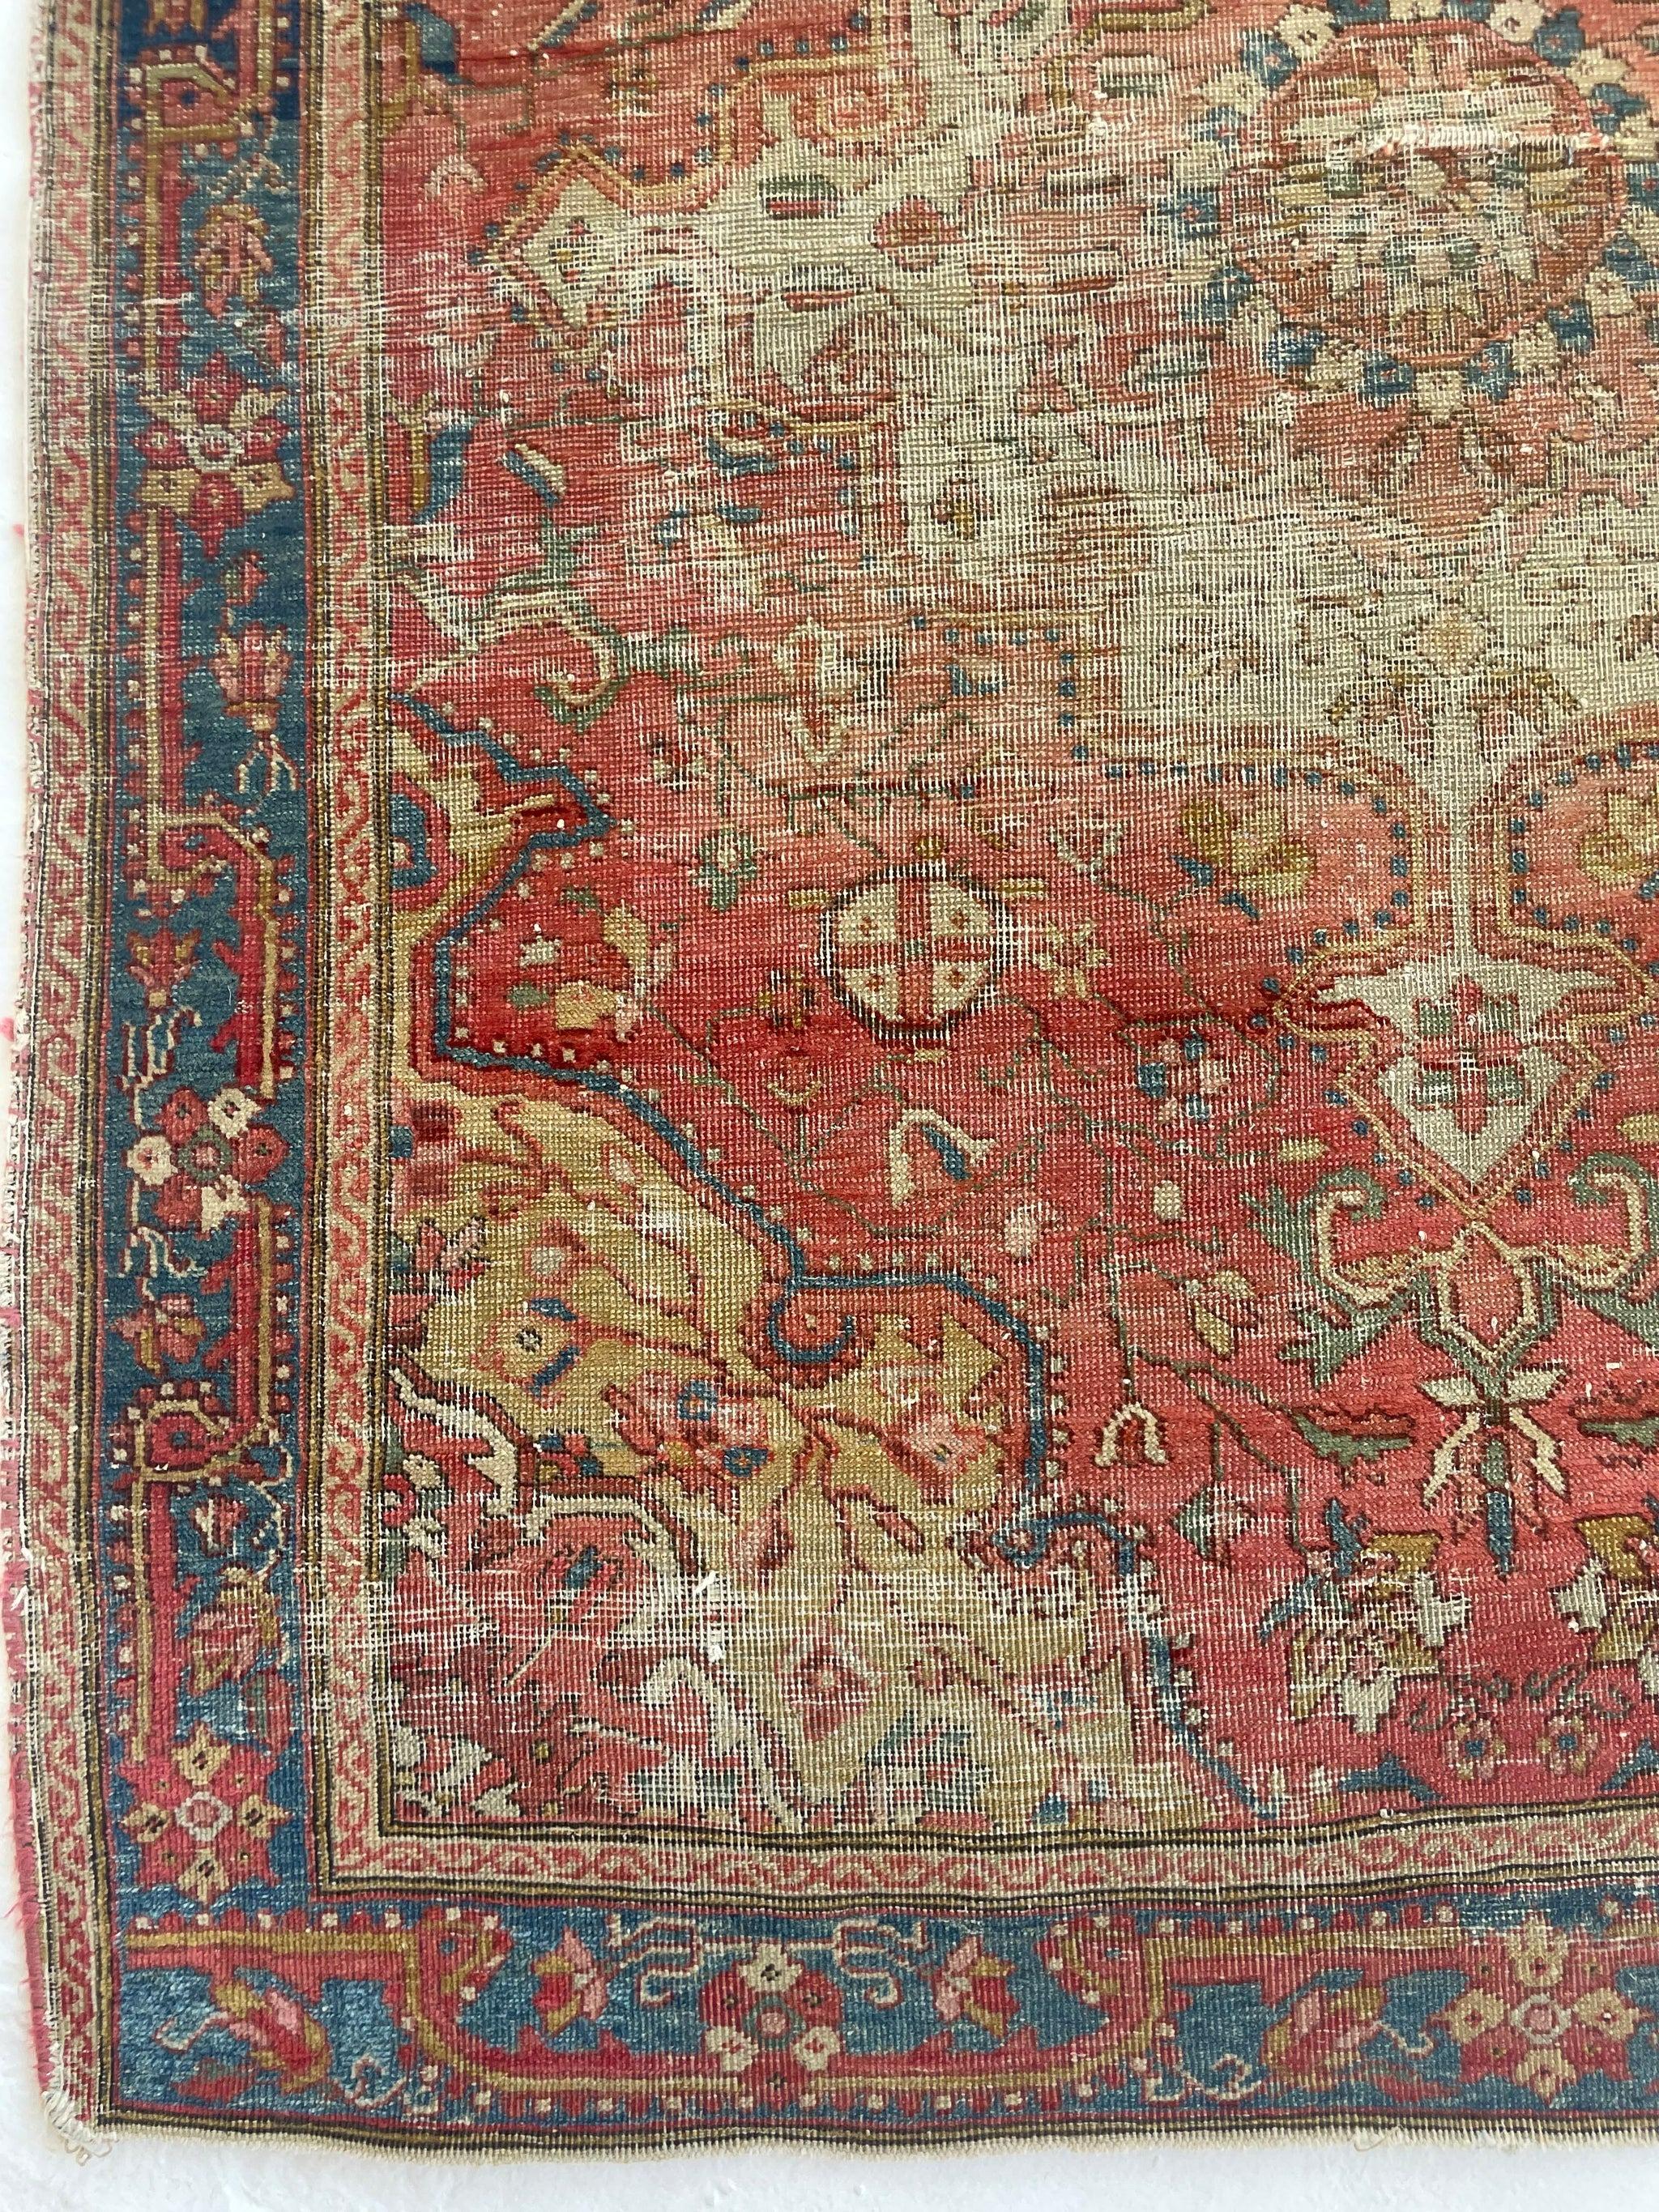 Super Fine Antique Rug Squarish size camel Corners with Soft Pinks, Rust, Ice Blue & Mint Green

Size: 3.7 x 4.6
Age: Antique, C. 1910
Pile: Low with amazing age-related wear with one corner of the piece worn in a little

This rug is